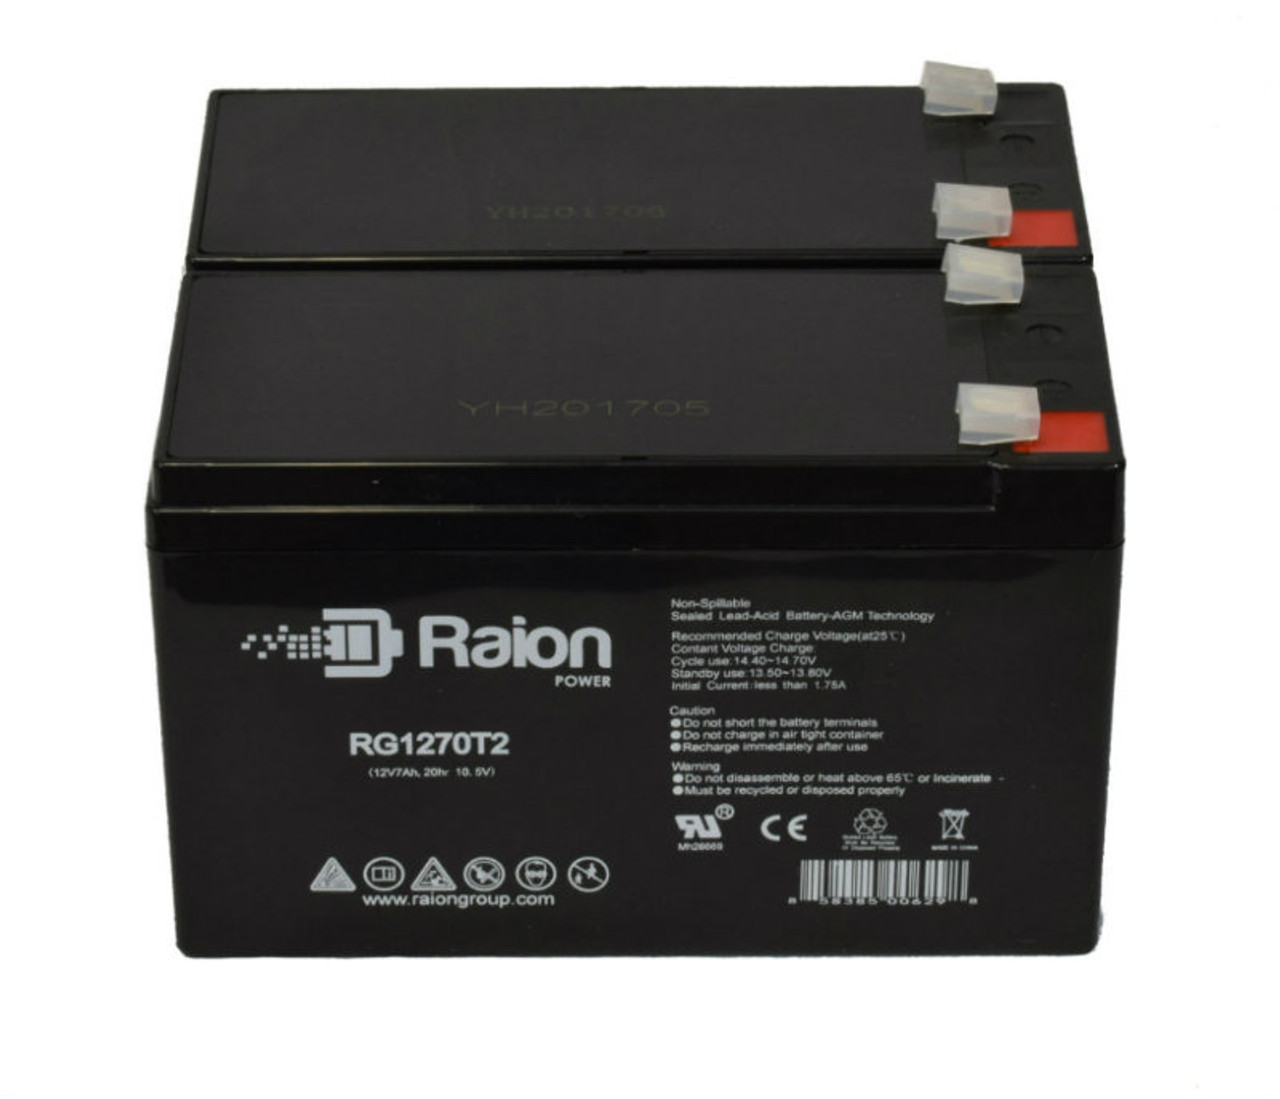 Raion Power Replacement RG1270T2 12V 7Ah Battery for Allied Healthcare 138 Schuco-Vac Portable DC Aspirator - 2 Pack